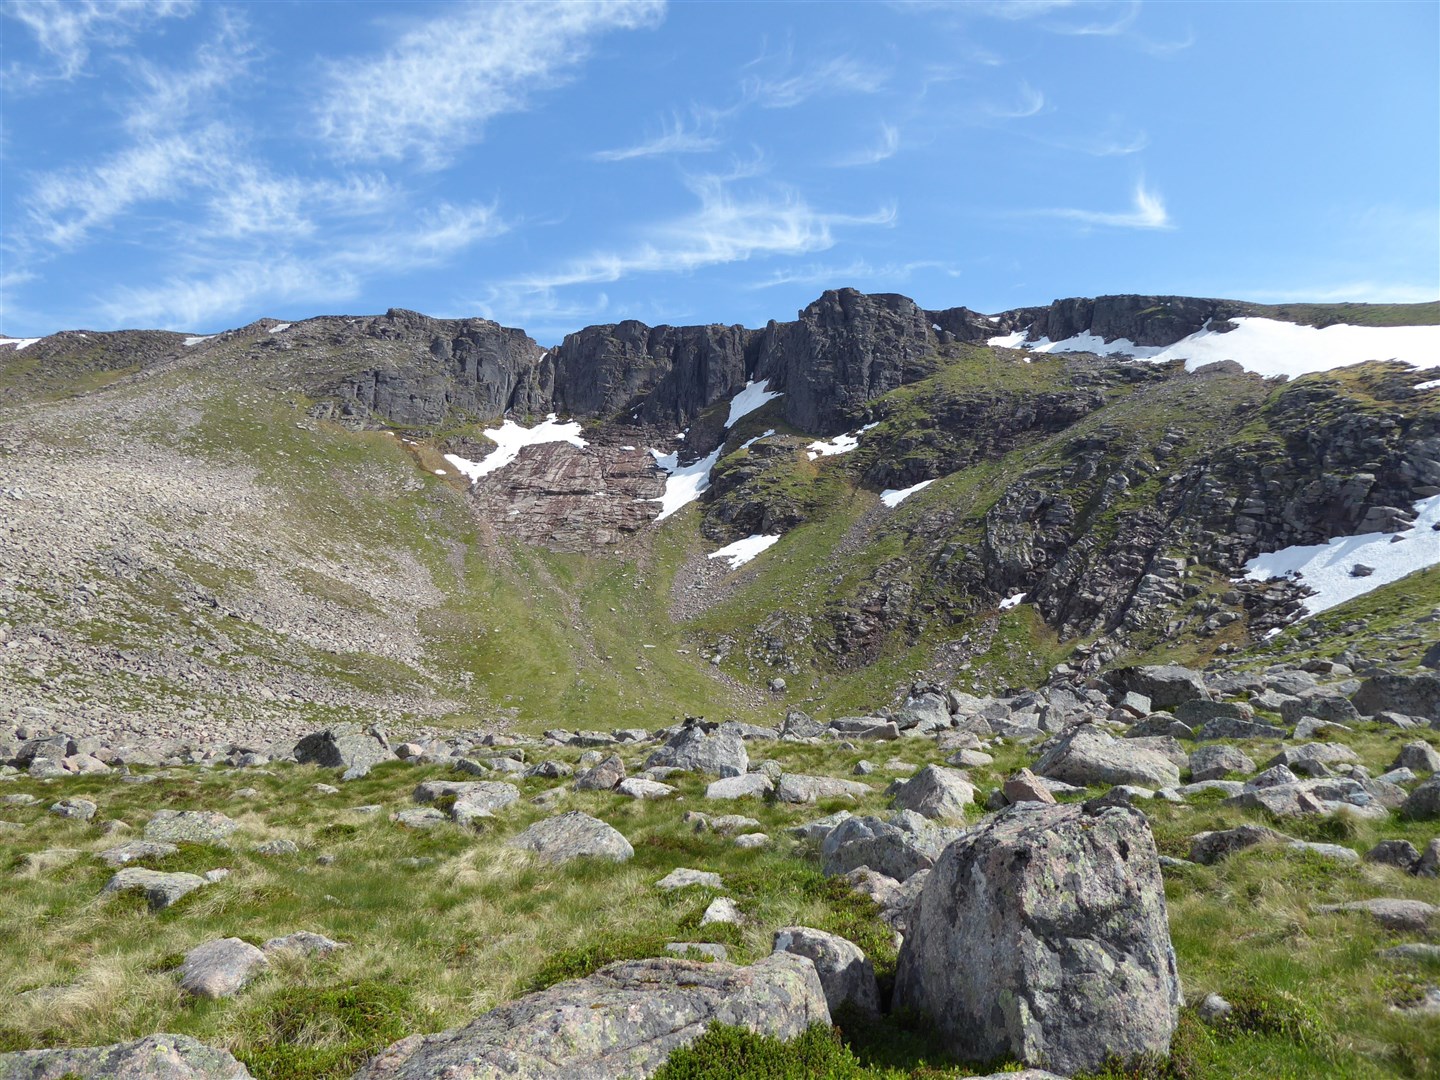 Project manager Gwenda Diack caught the Cairngorms at their awesome best